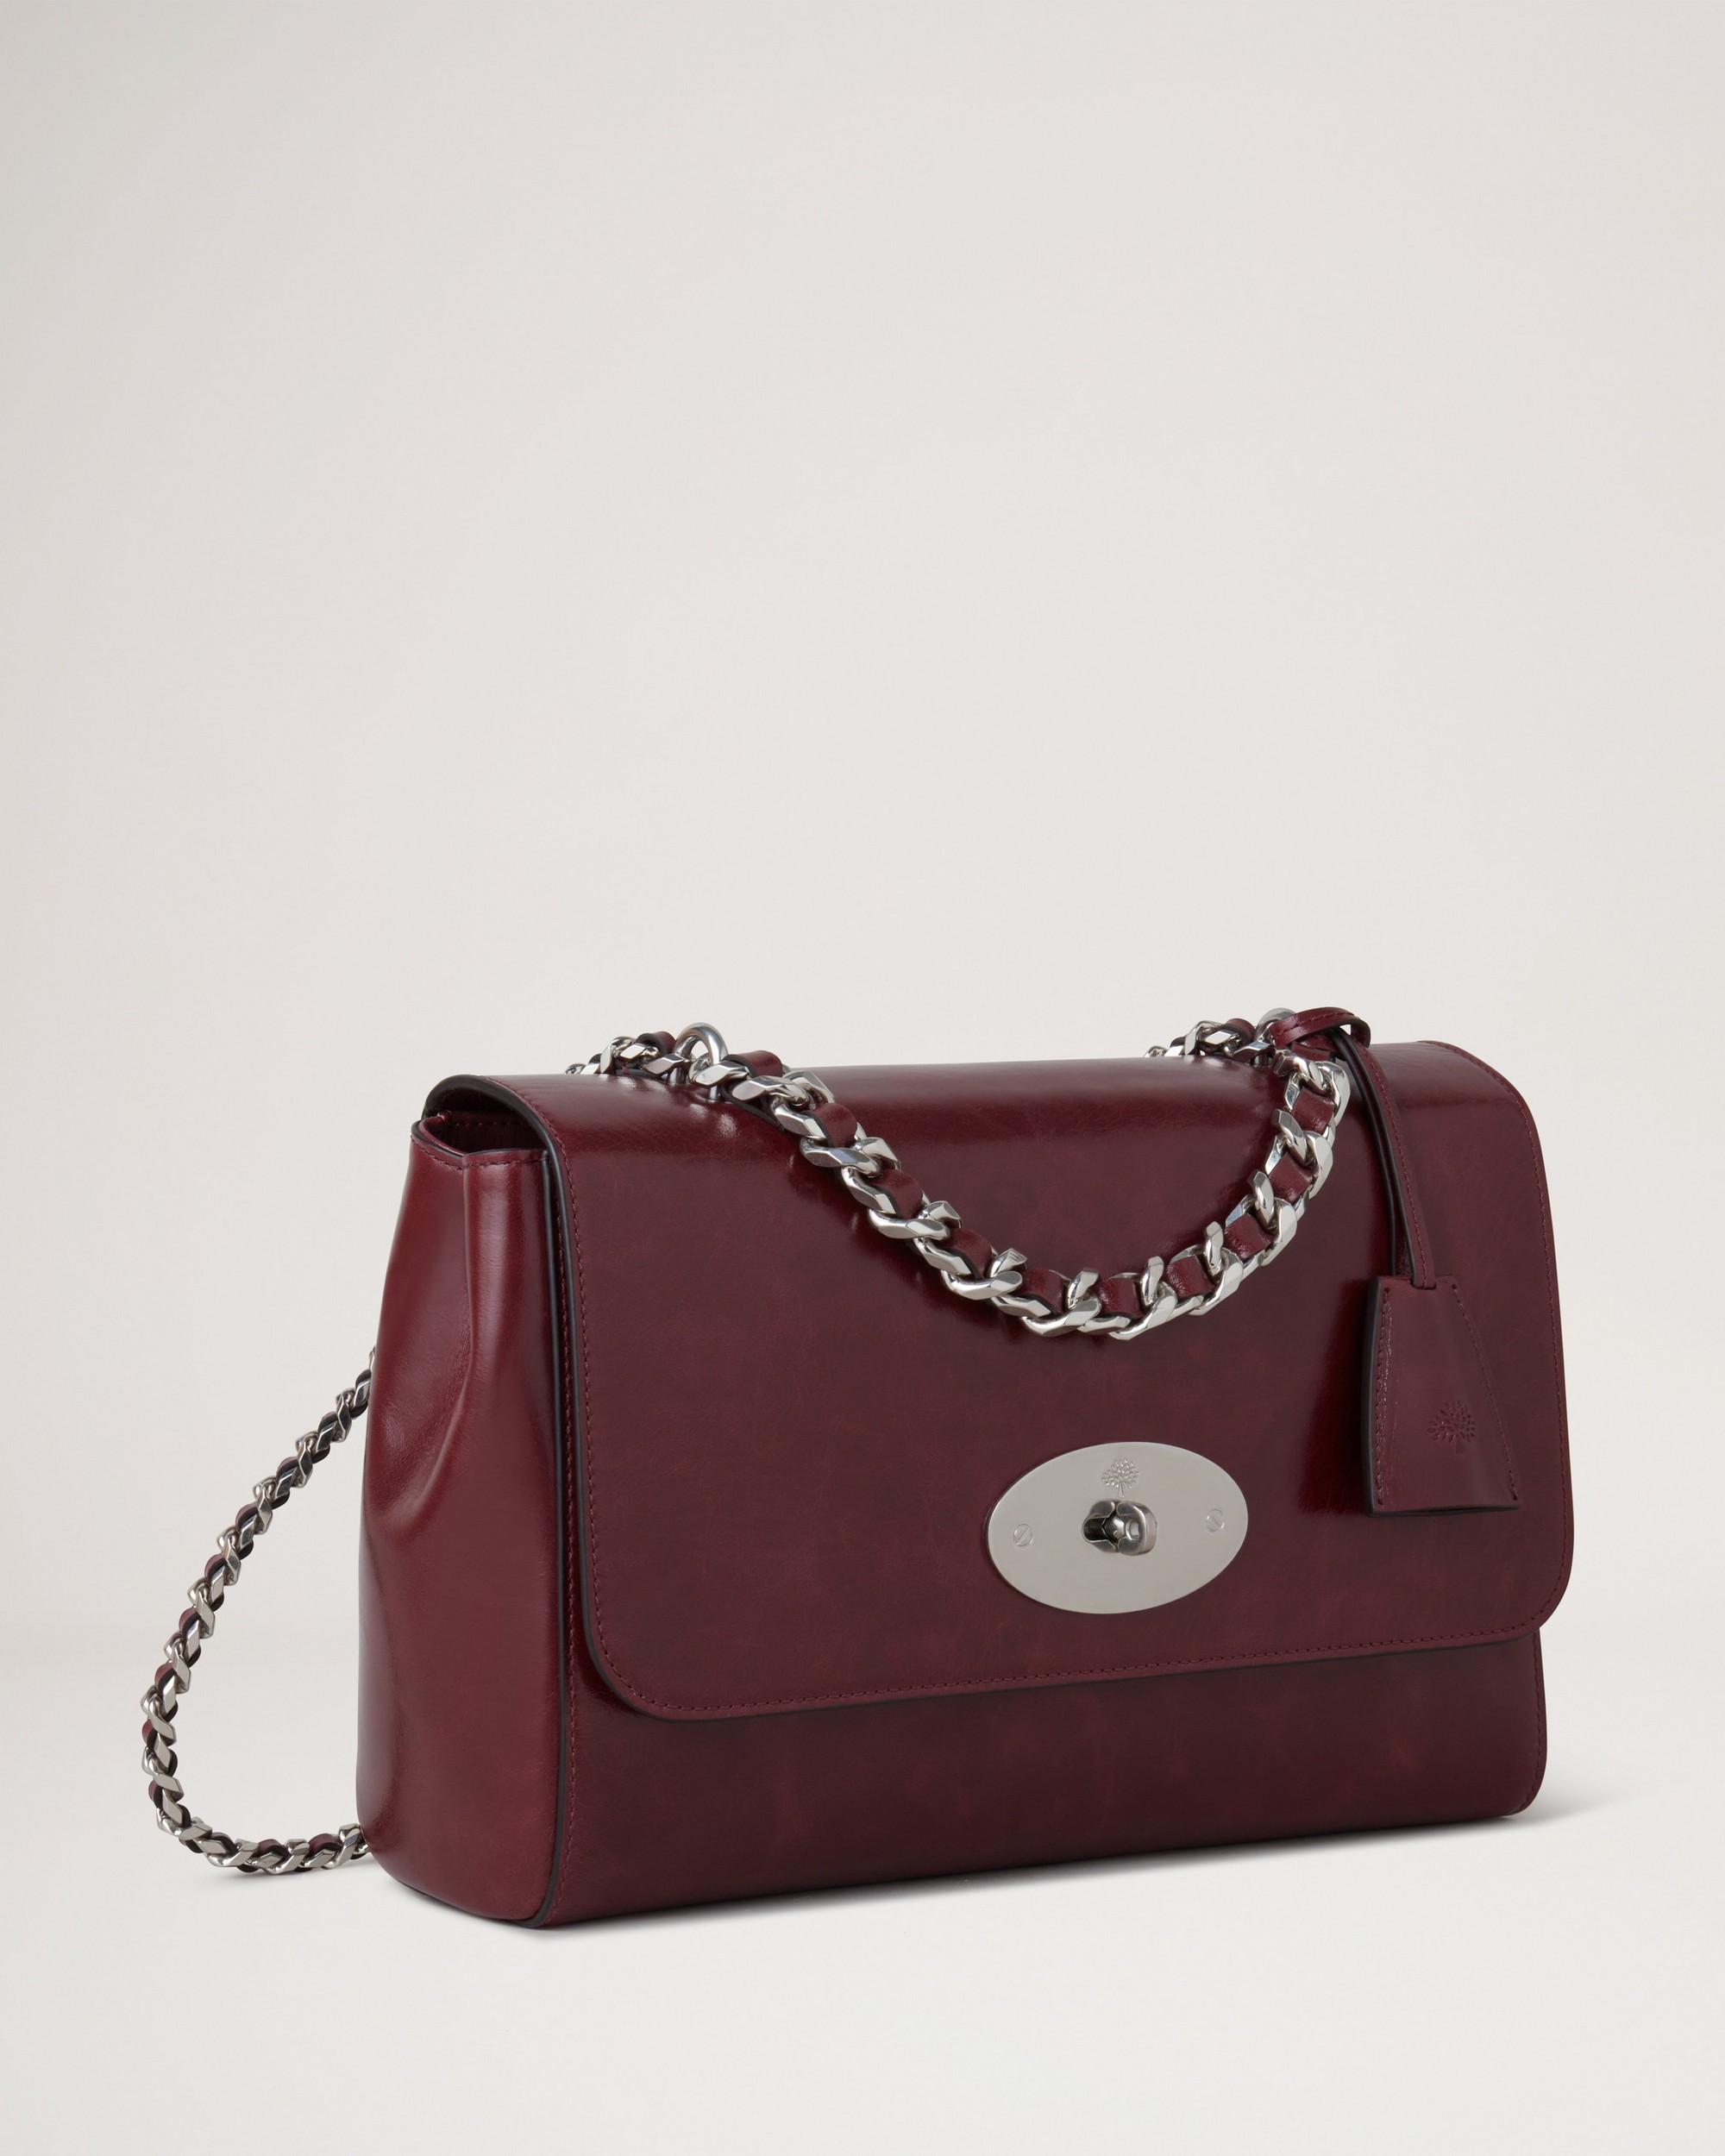 Medium Top Handle Lily | Black Cherry Wrinkly High Shine Leather | Lily ...